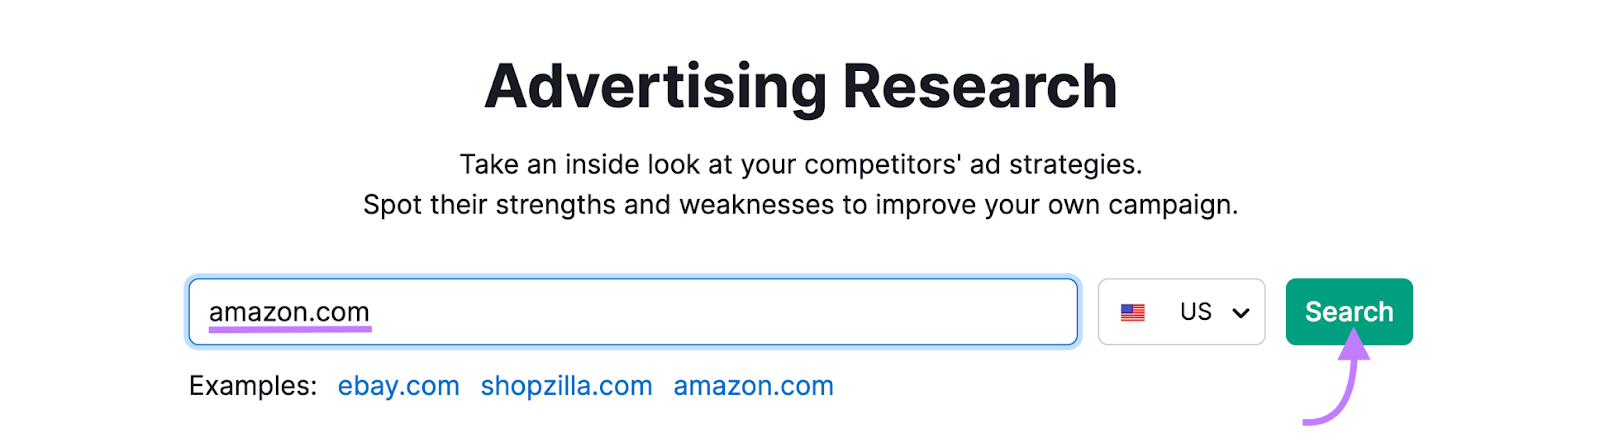 "amazon.com" entered into Advertising Research tool